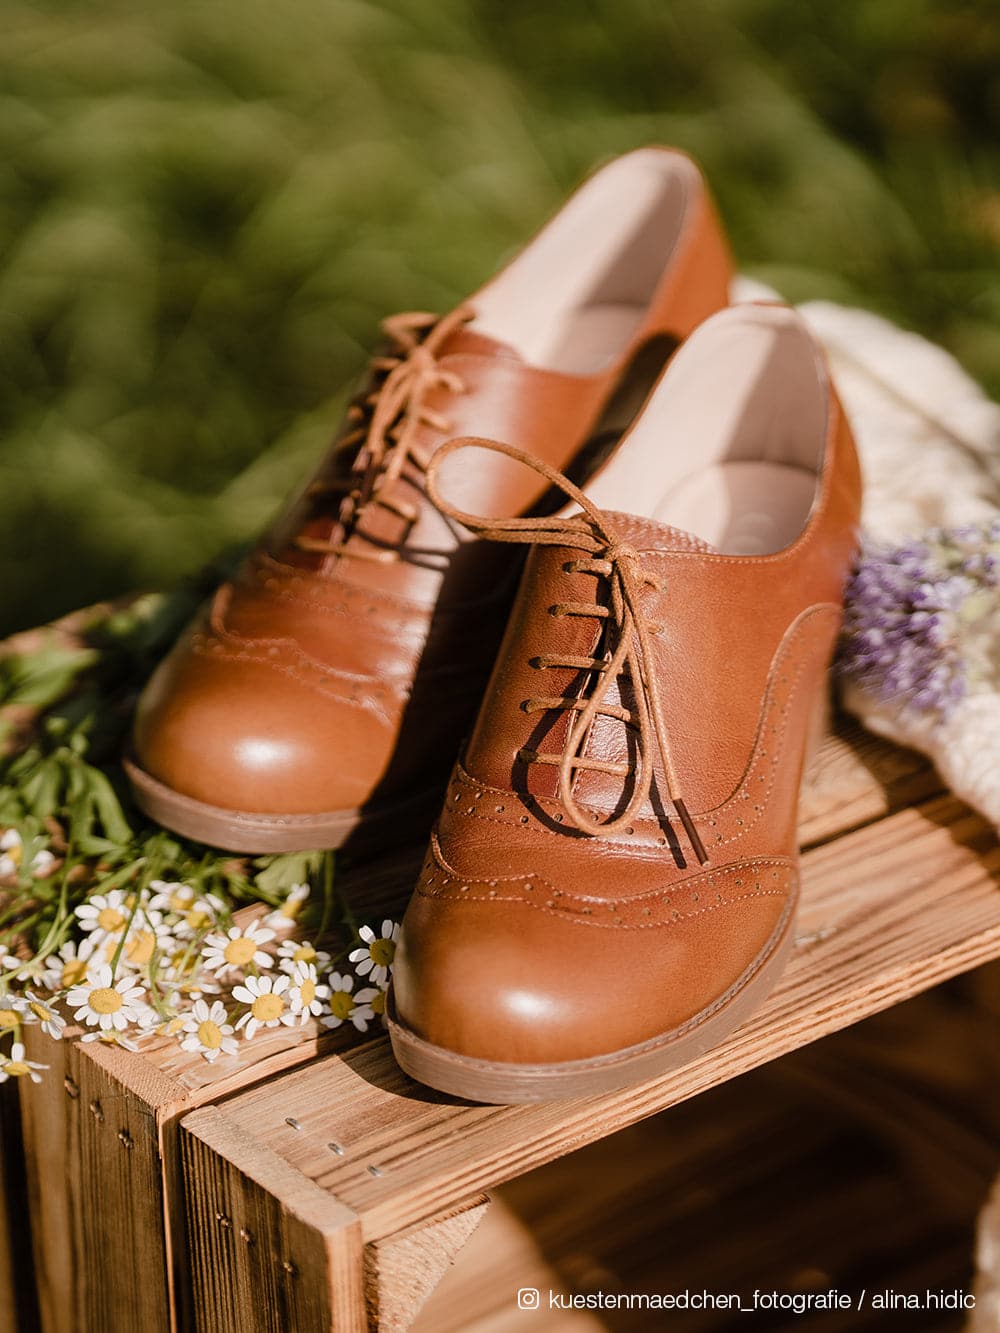 Ecosusi Vintage - Incase you haven't seen our new shoes yet! Flora #ecosusi  shoes